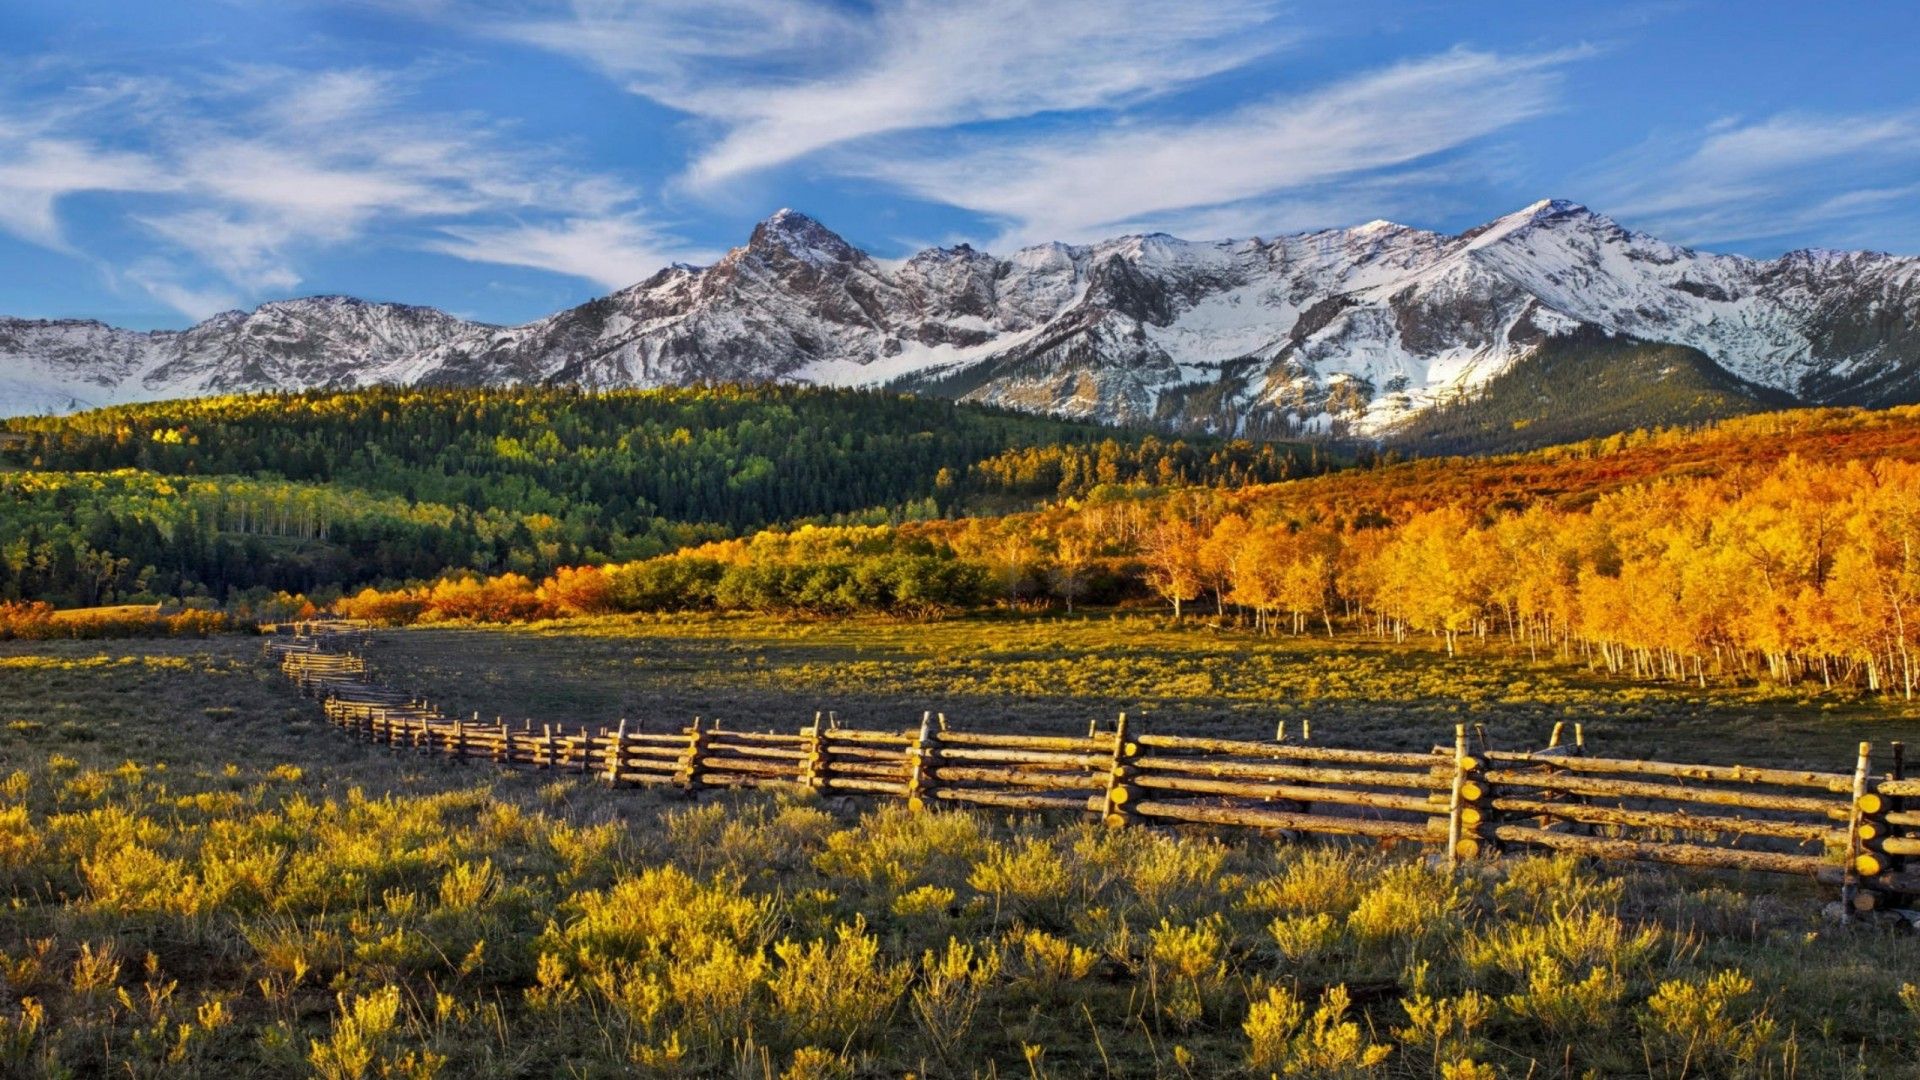 Beautiful, HD Wallpaper Fall Mountains With Snow Forest With Yellow Leaves And White Clouds In The Sky, Beautiful Scenery In Colorado, Usa, Wallpaper13.com